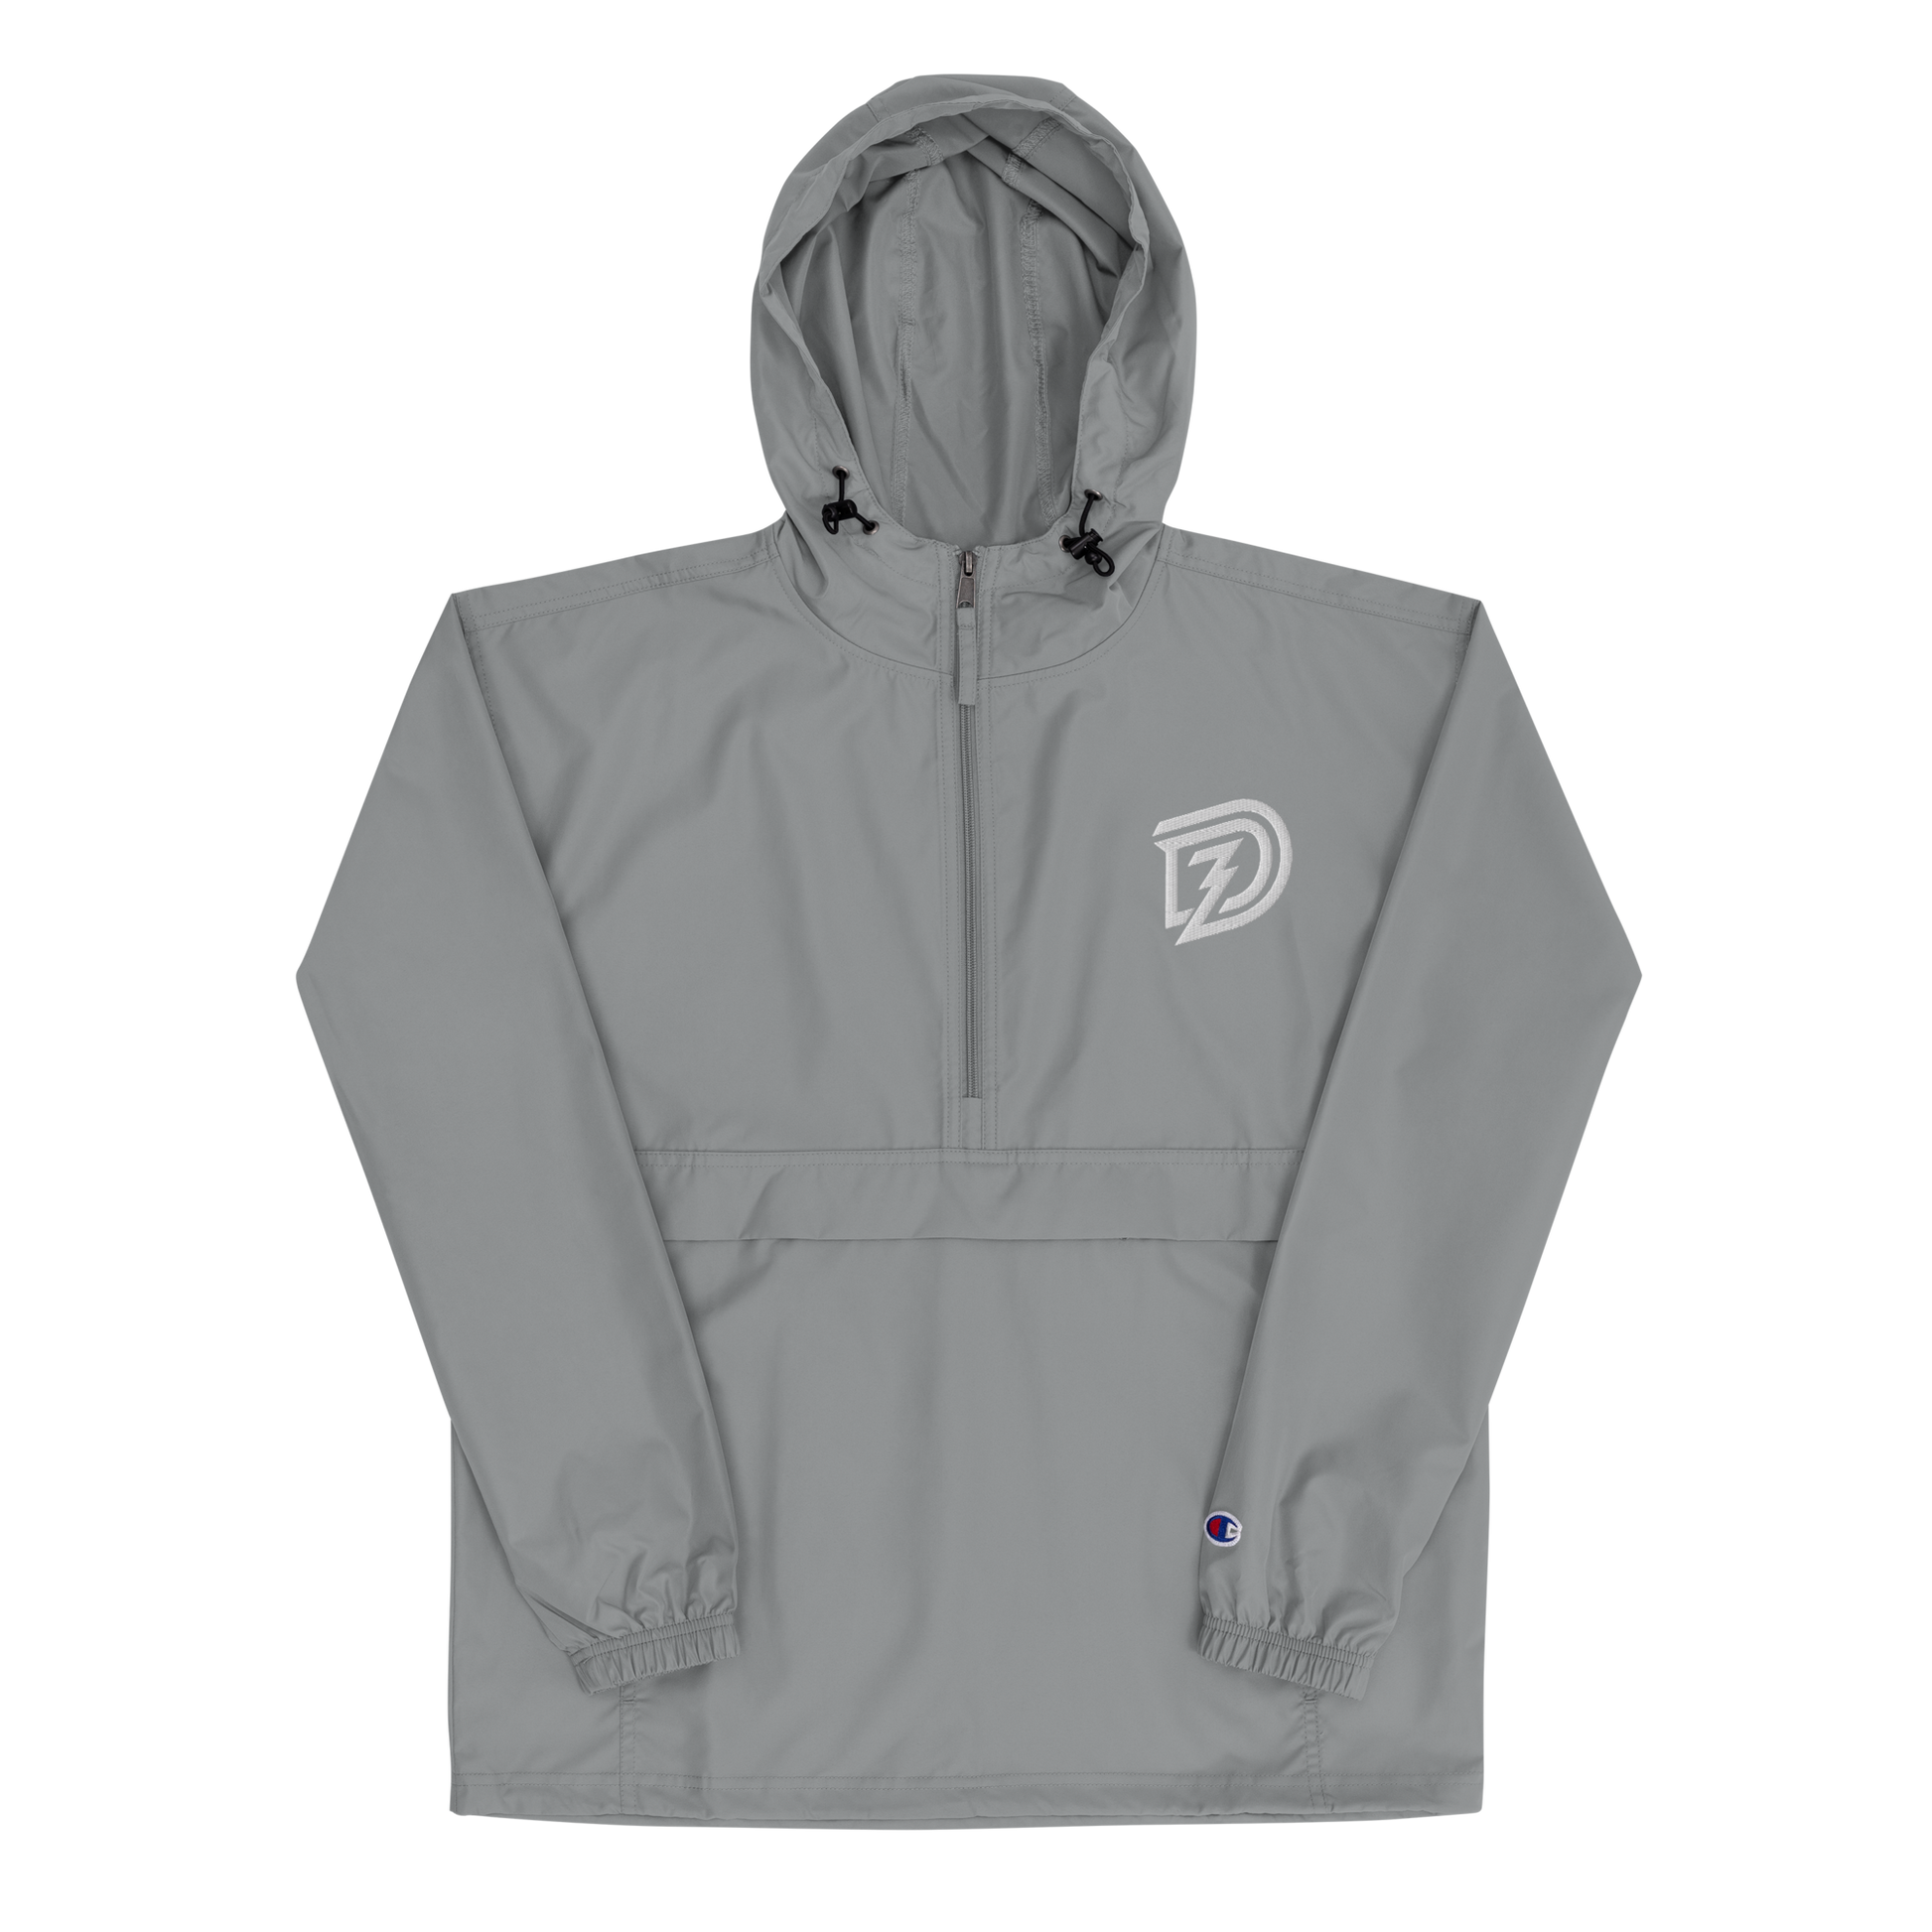 Embroidered Champion Packable Jacket in Graphite with hood up